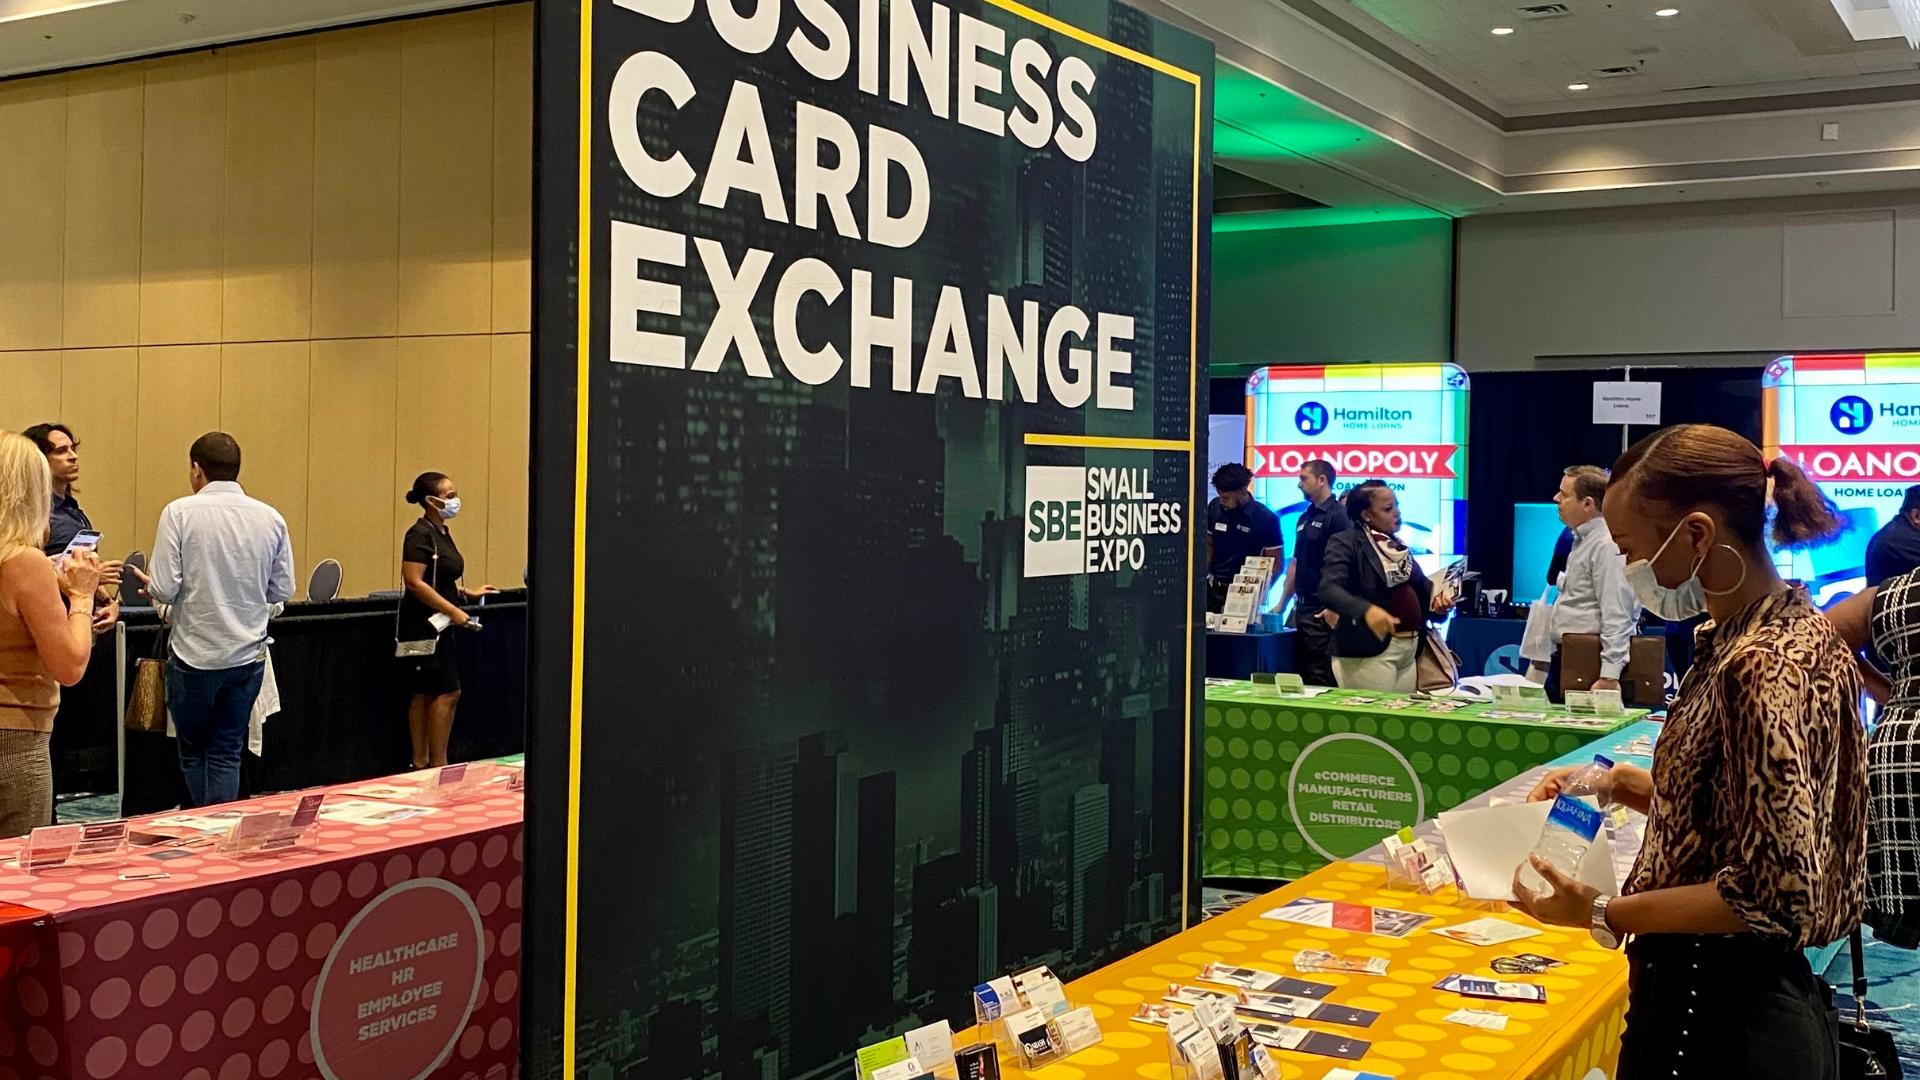 A visitor views the display of business cards at the Small Business Expo trade show in Orlando, Florida